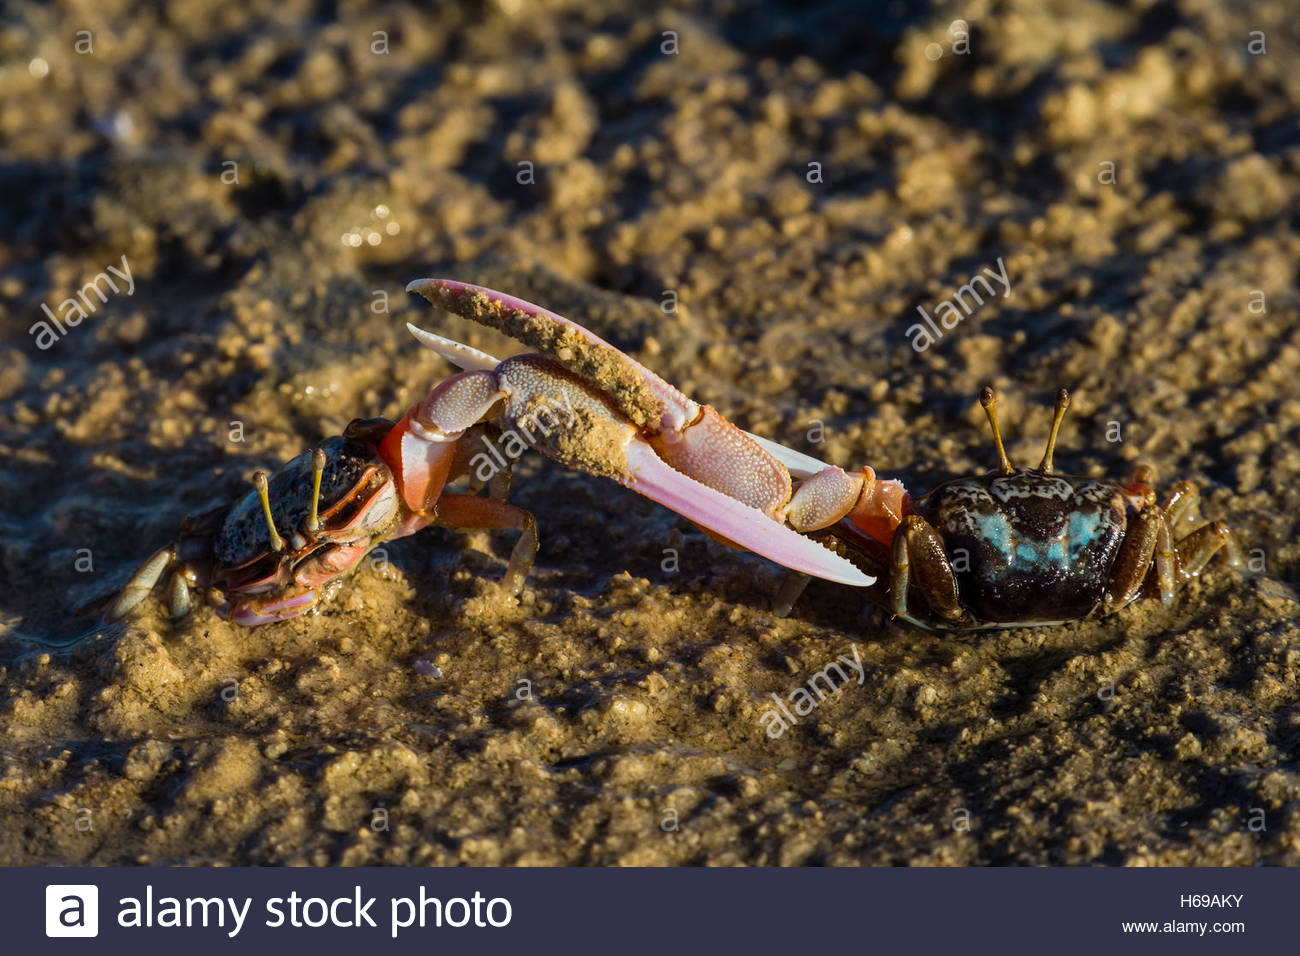 A close up view of a Fidler Crab on Jar Island in the Kimberley Region of Northwest Australia. Stock Photo